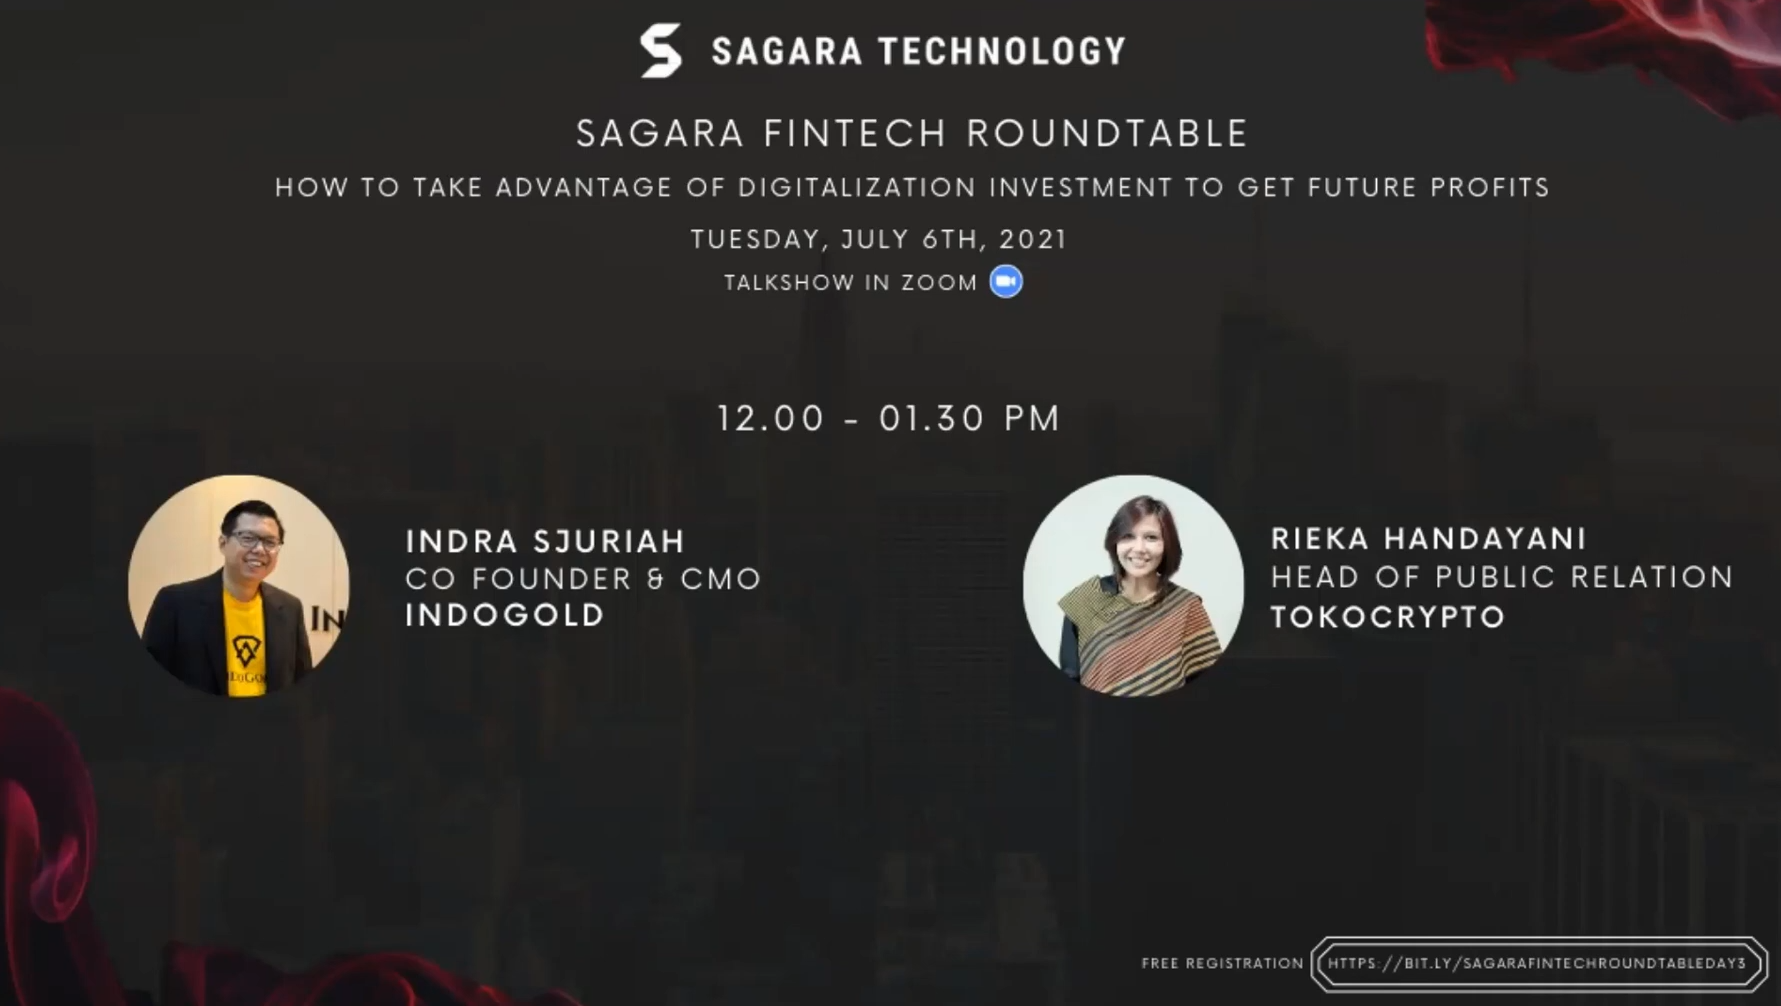 Sagara Fintech Roundtable - How to Take Advantage of Digitalization Investment to Get Future Profit